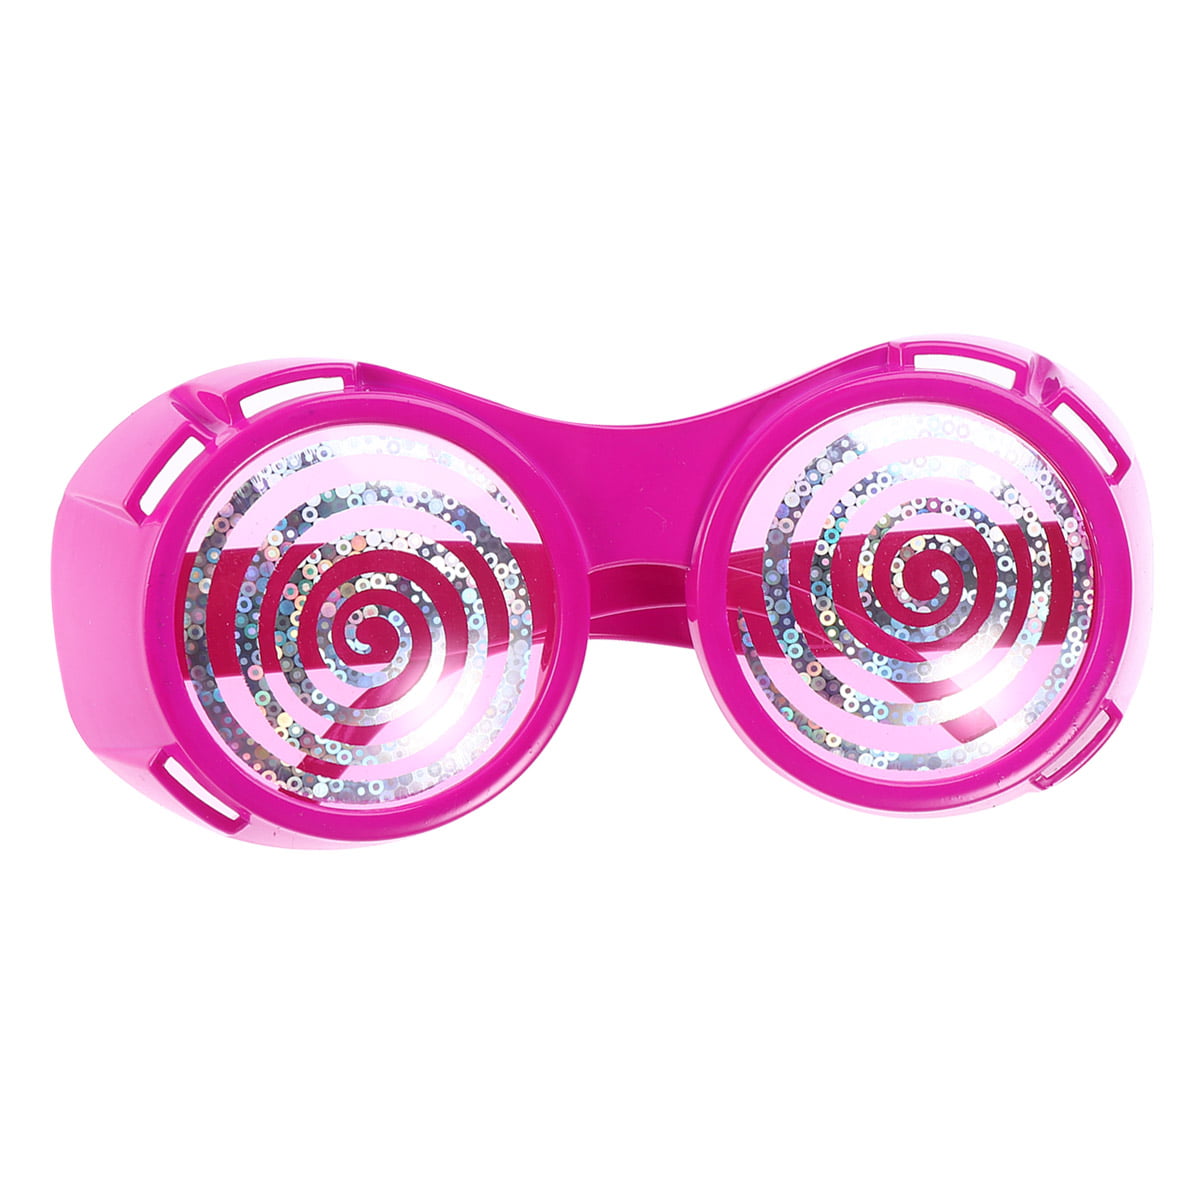 Photo Booth Props Party Tricky Funny Glasses Eyeball Glasses Rose Red